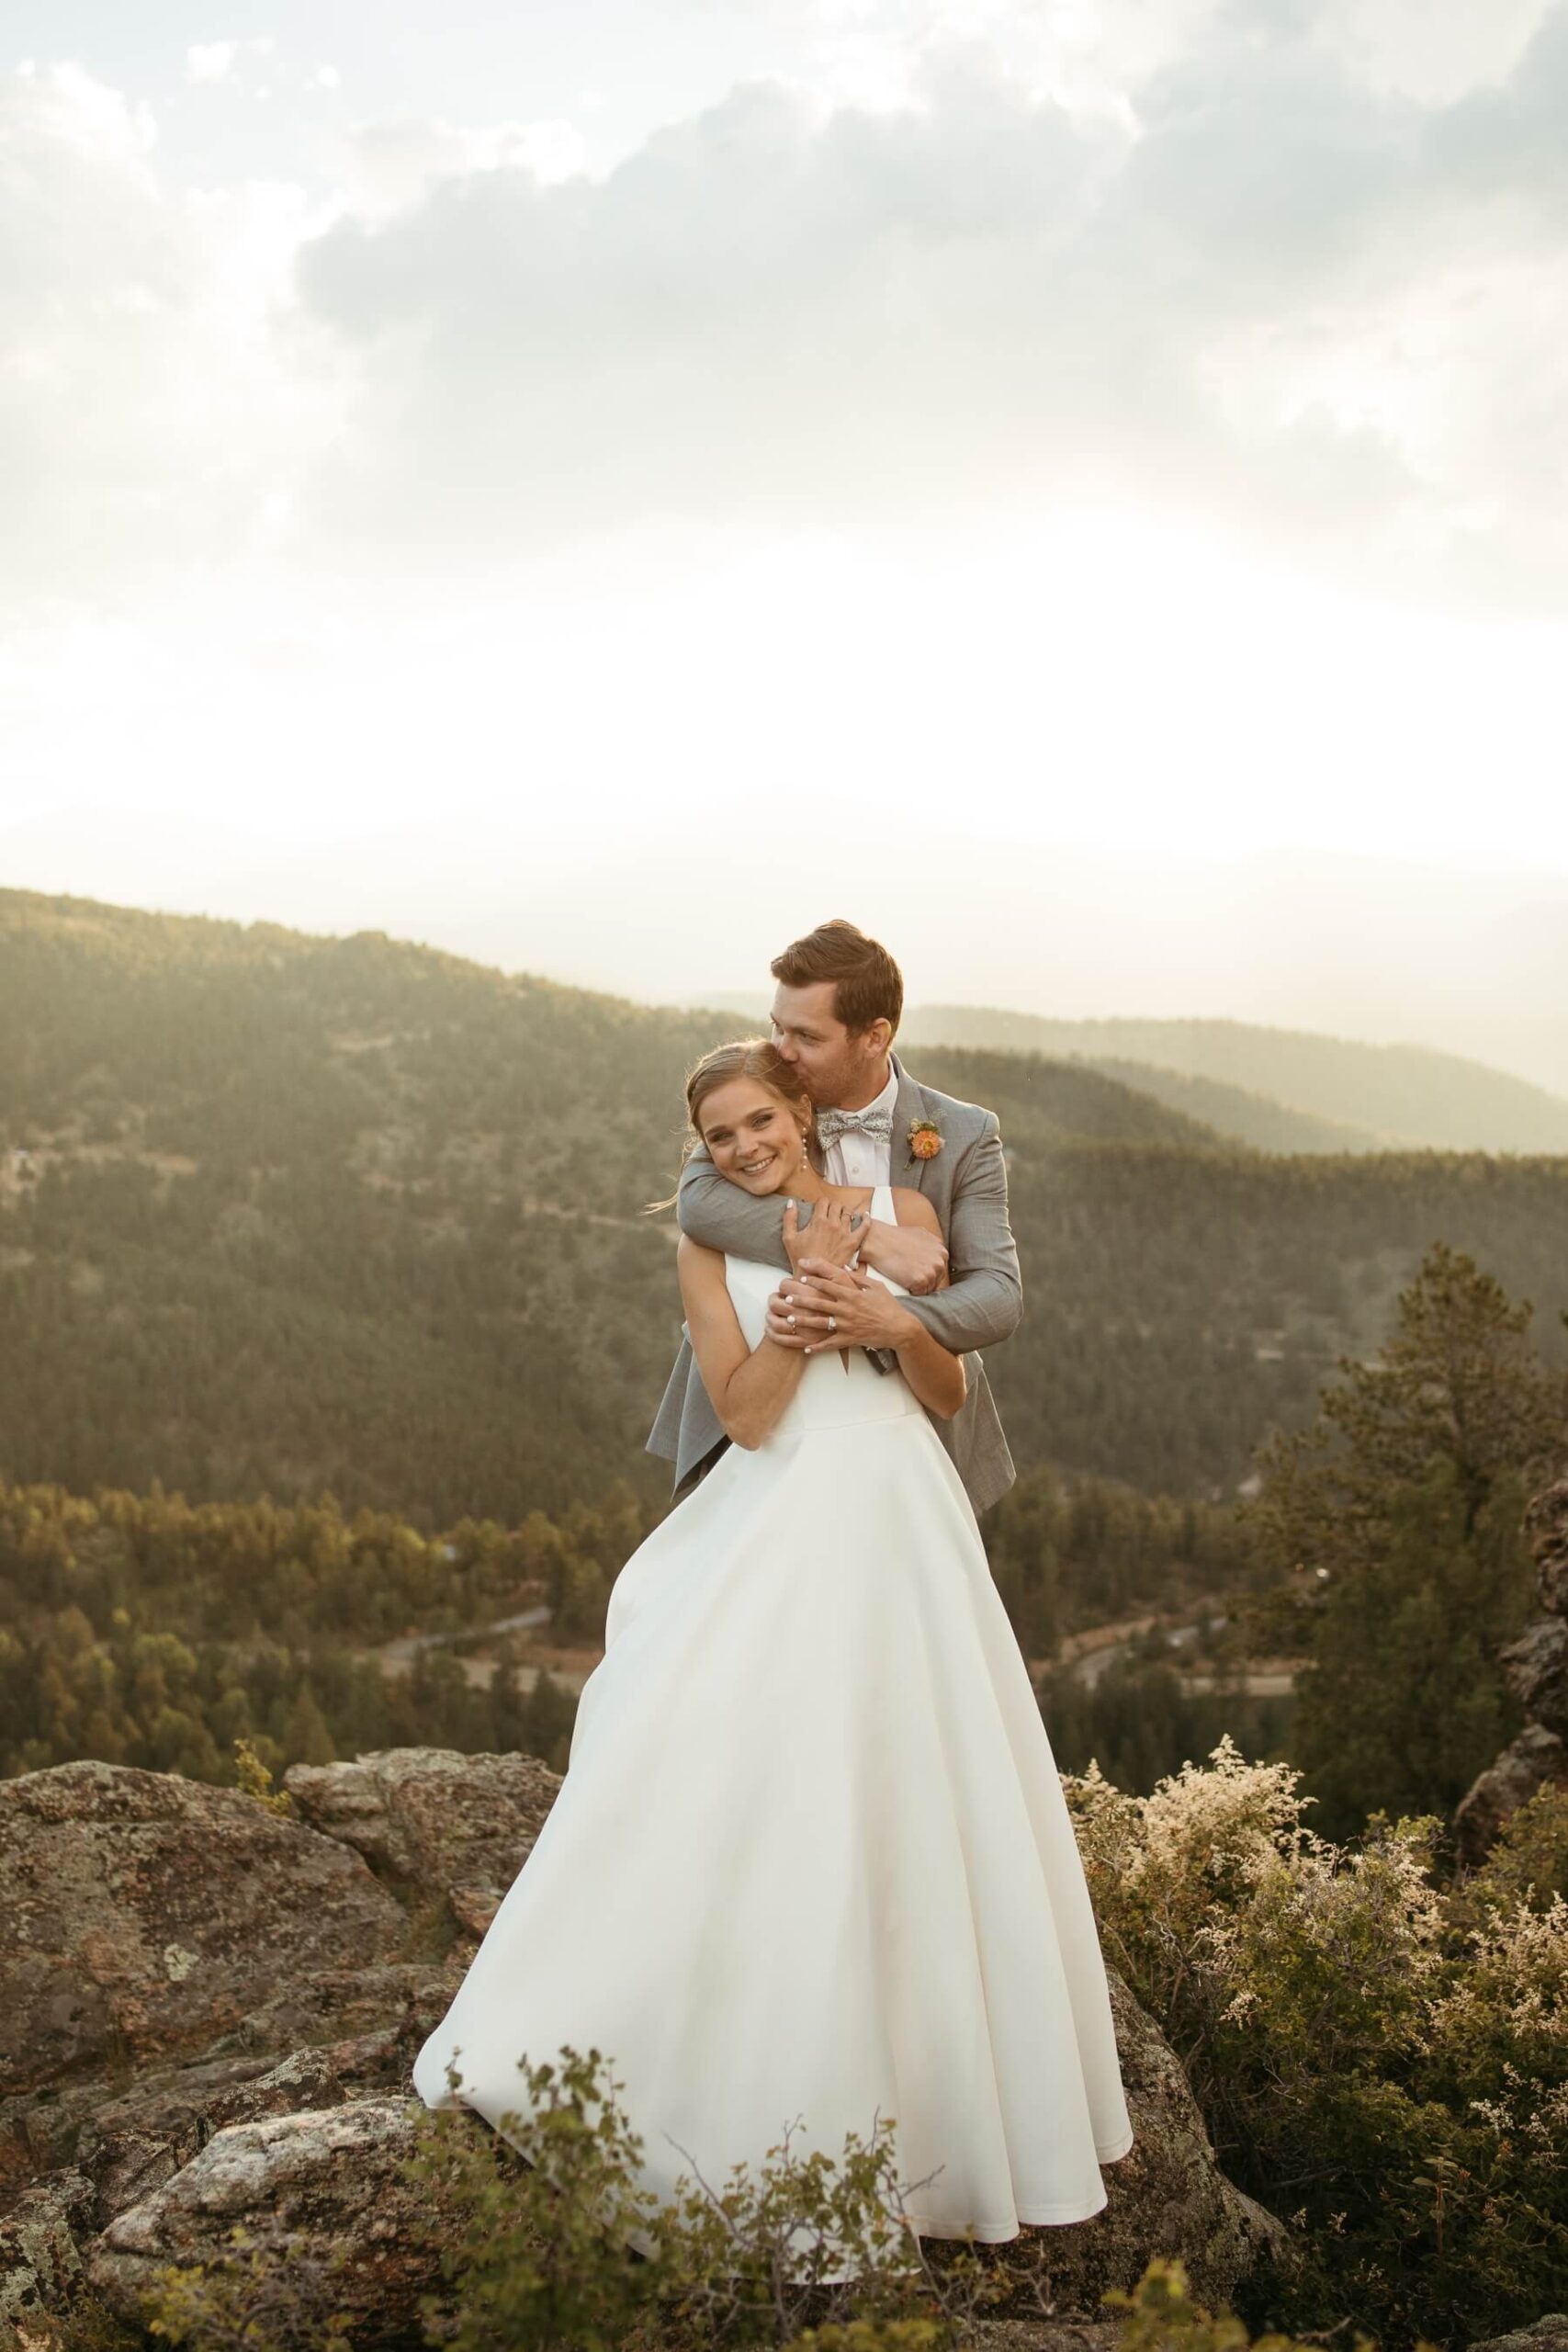 Groom standing behind bride kissing her head with mountains in the background